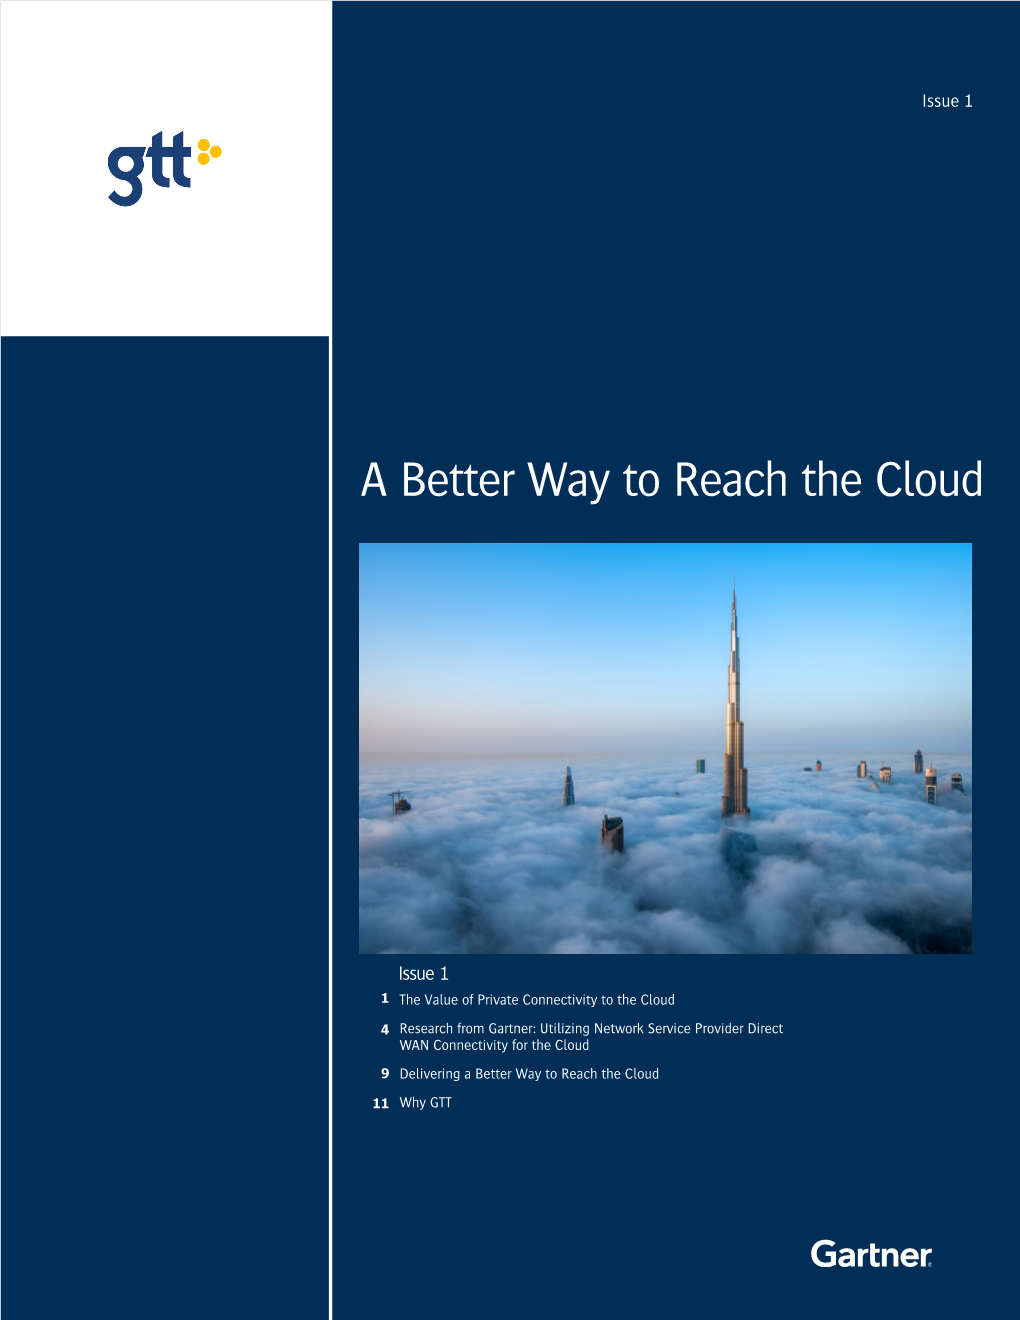 A Better Way to Reach the Cloud